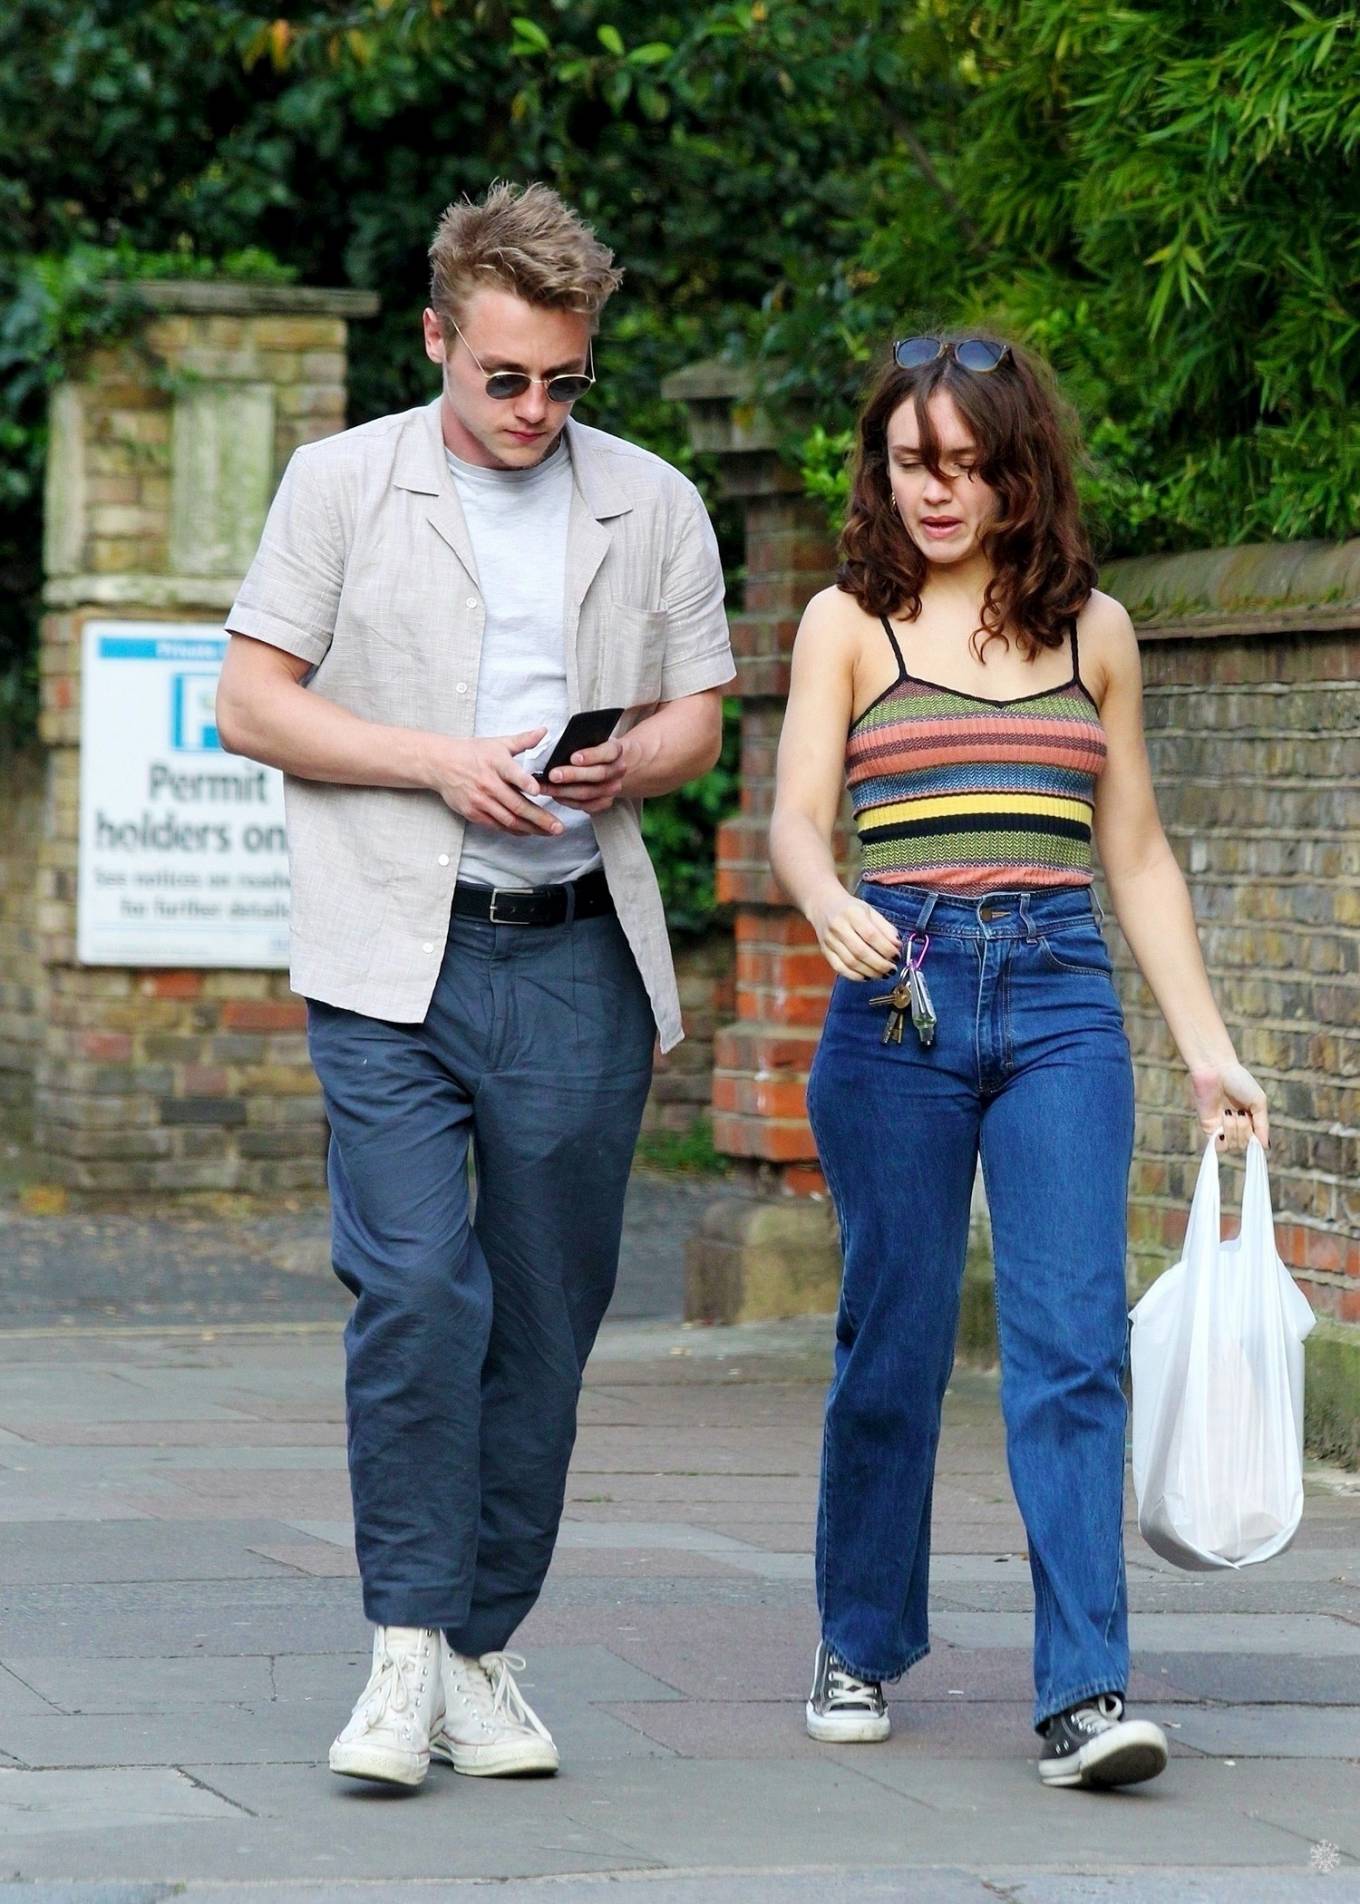 Olivia Cooke 2020 : Olivia Cooke and Ben Hardy - Shopping for supplies in P...